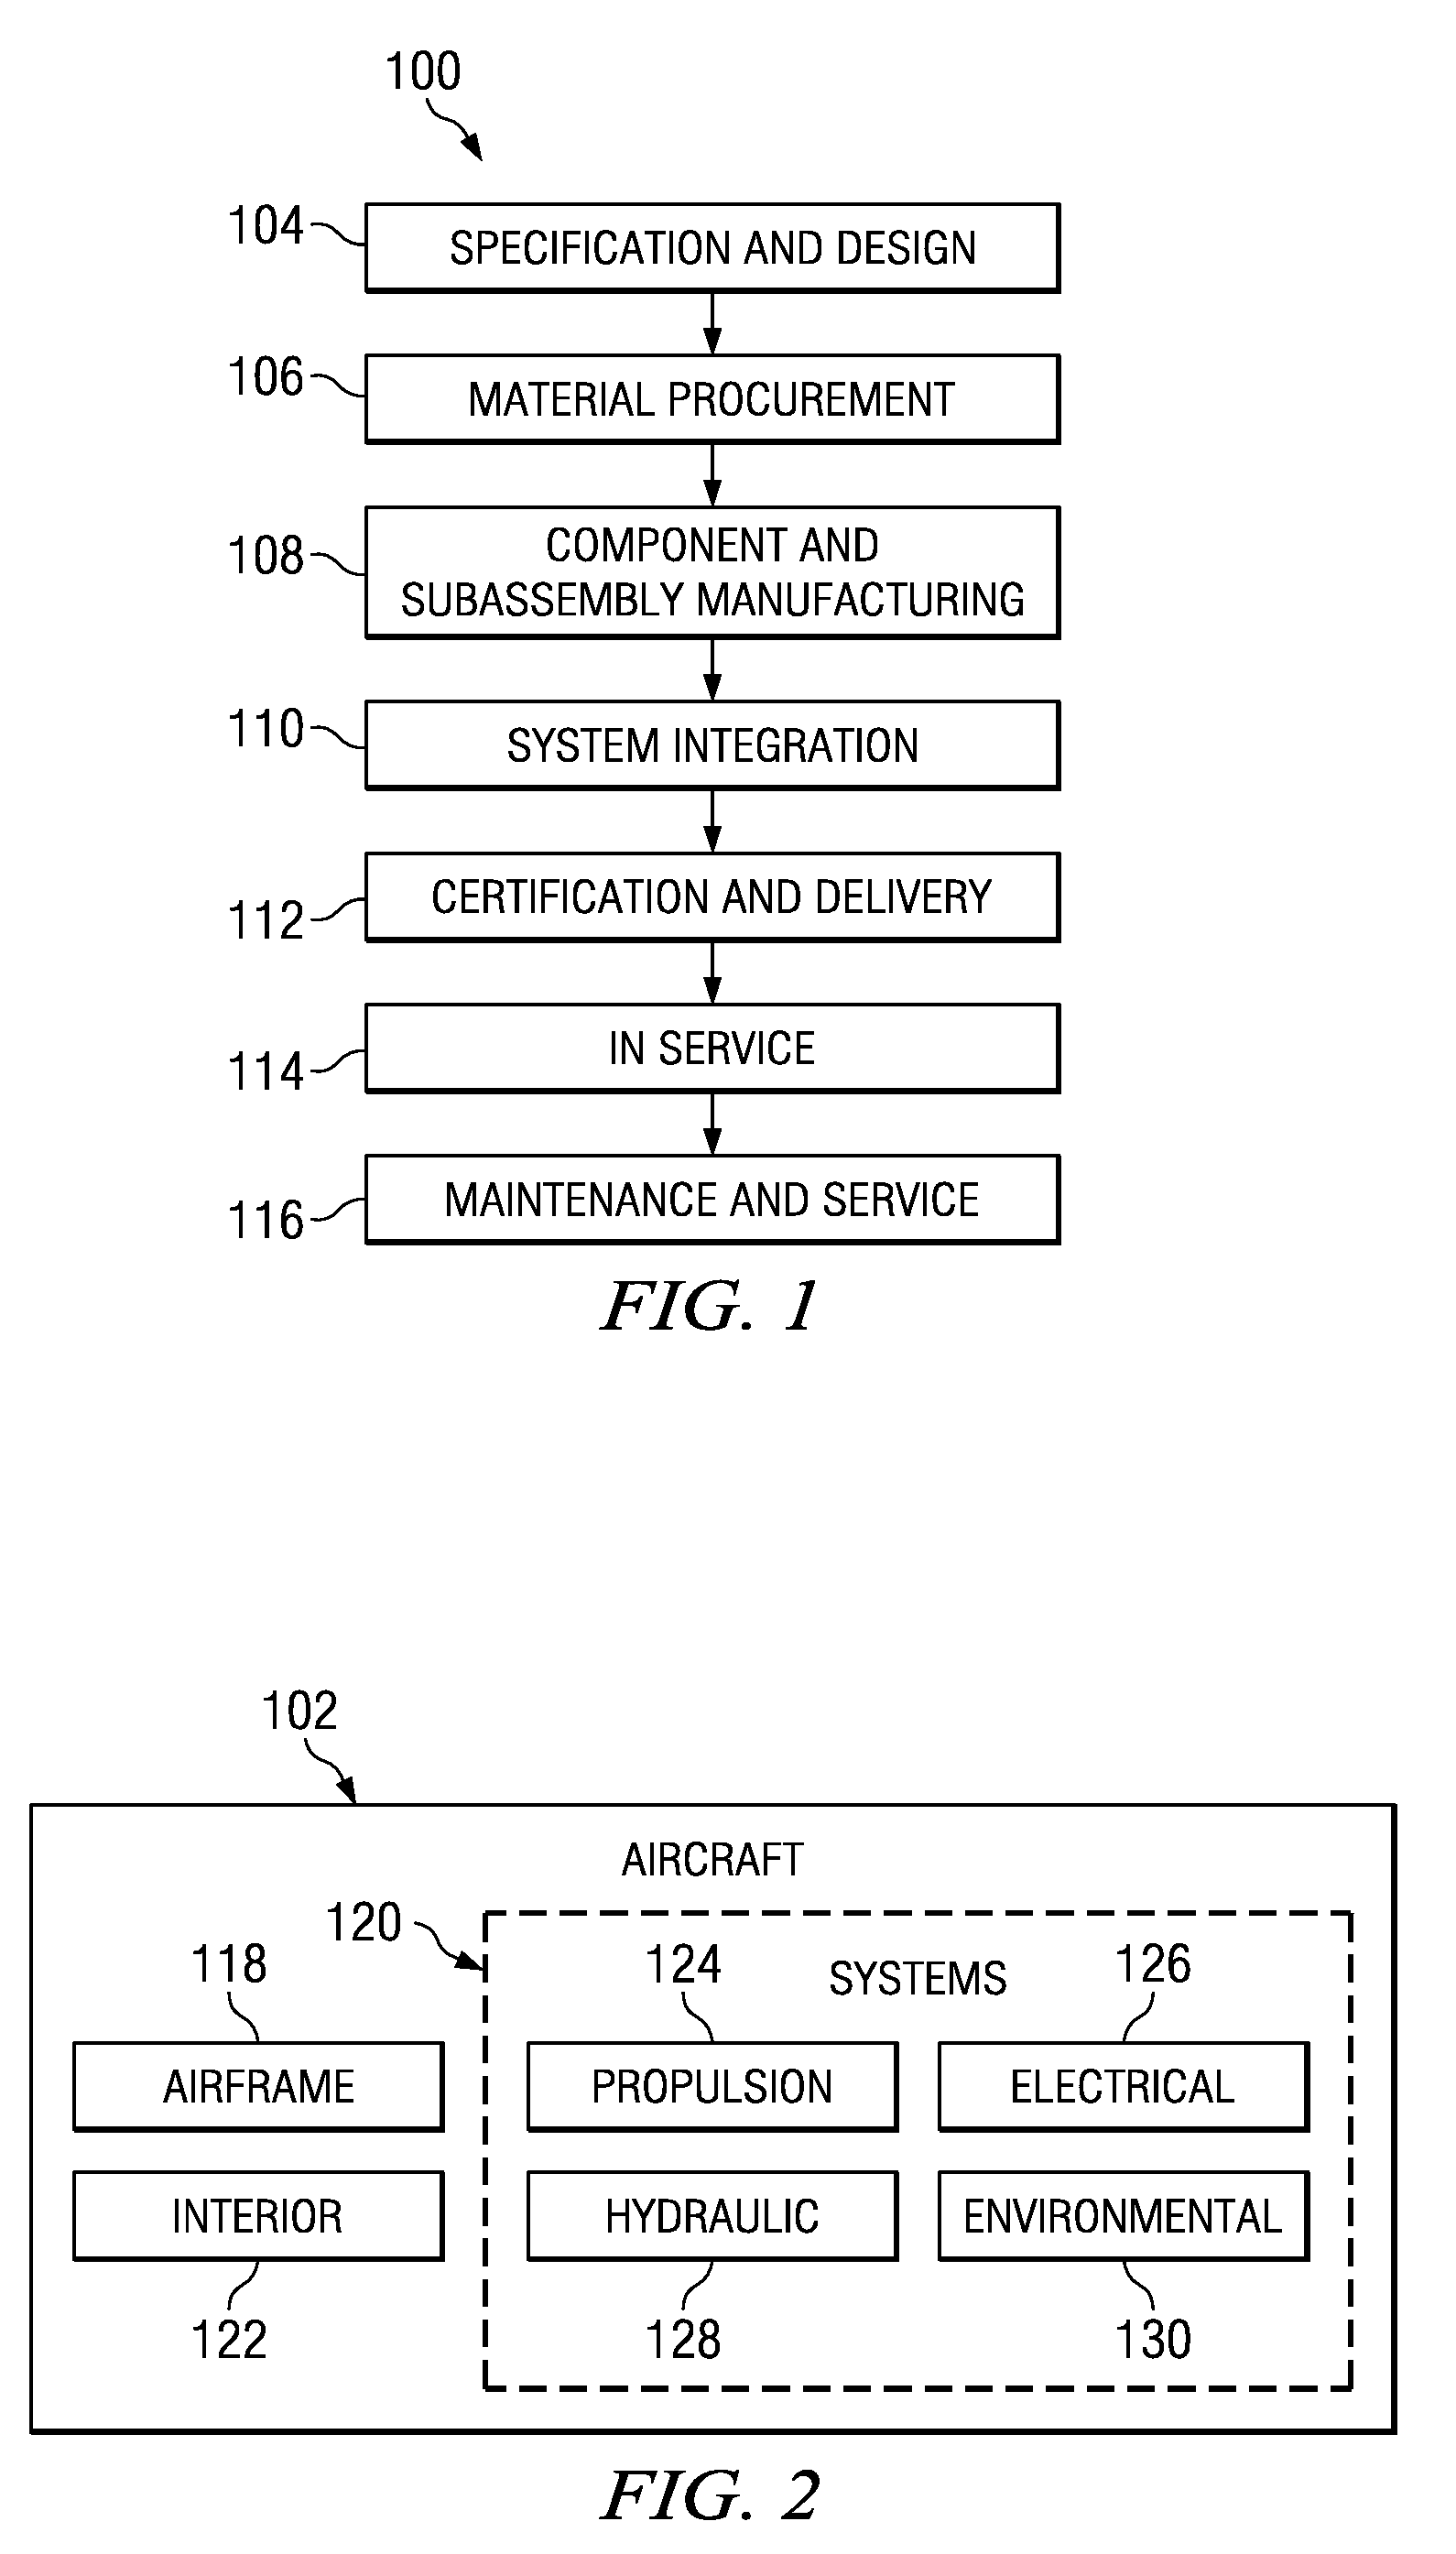 Method and apparatus to create bends in composite panels